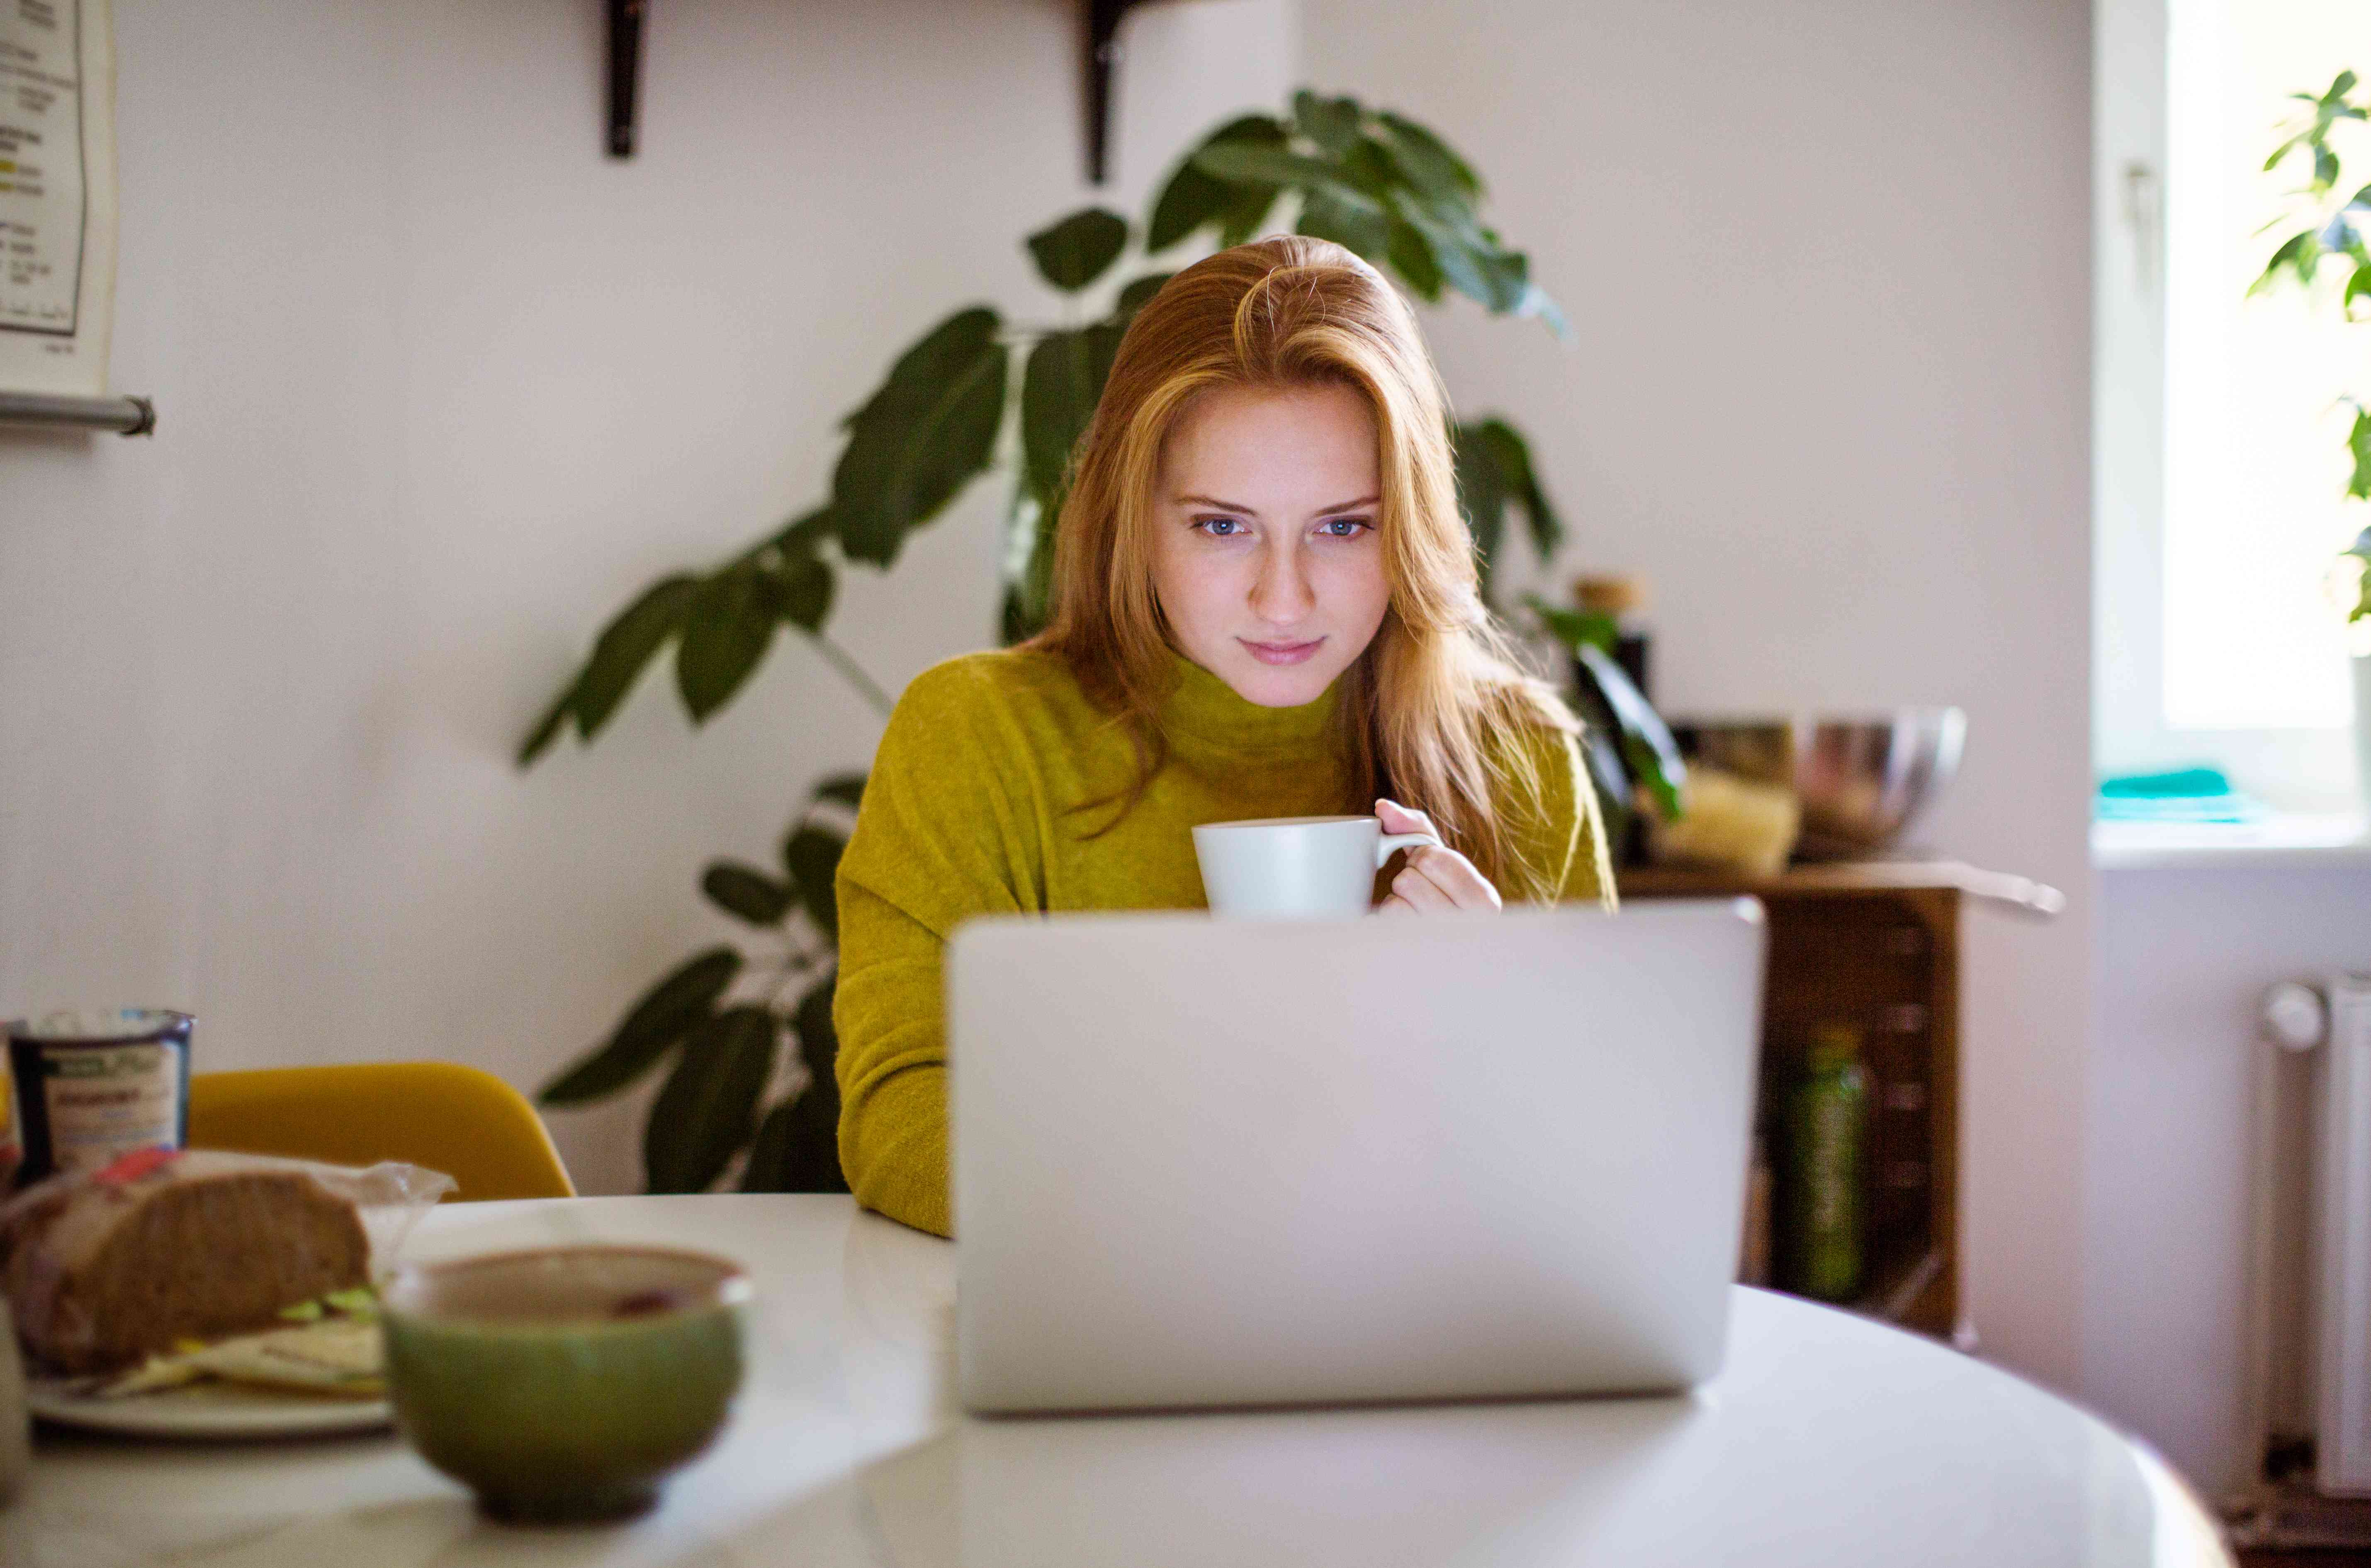 Young woman sitting at table looking at her laptop and drinking coffee.